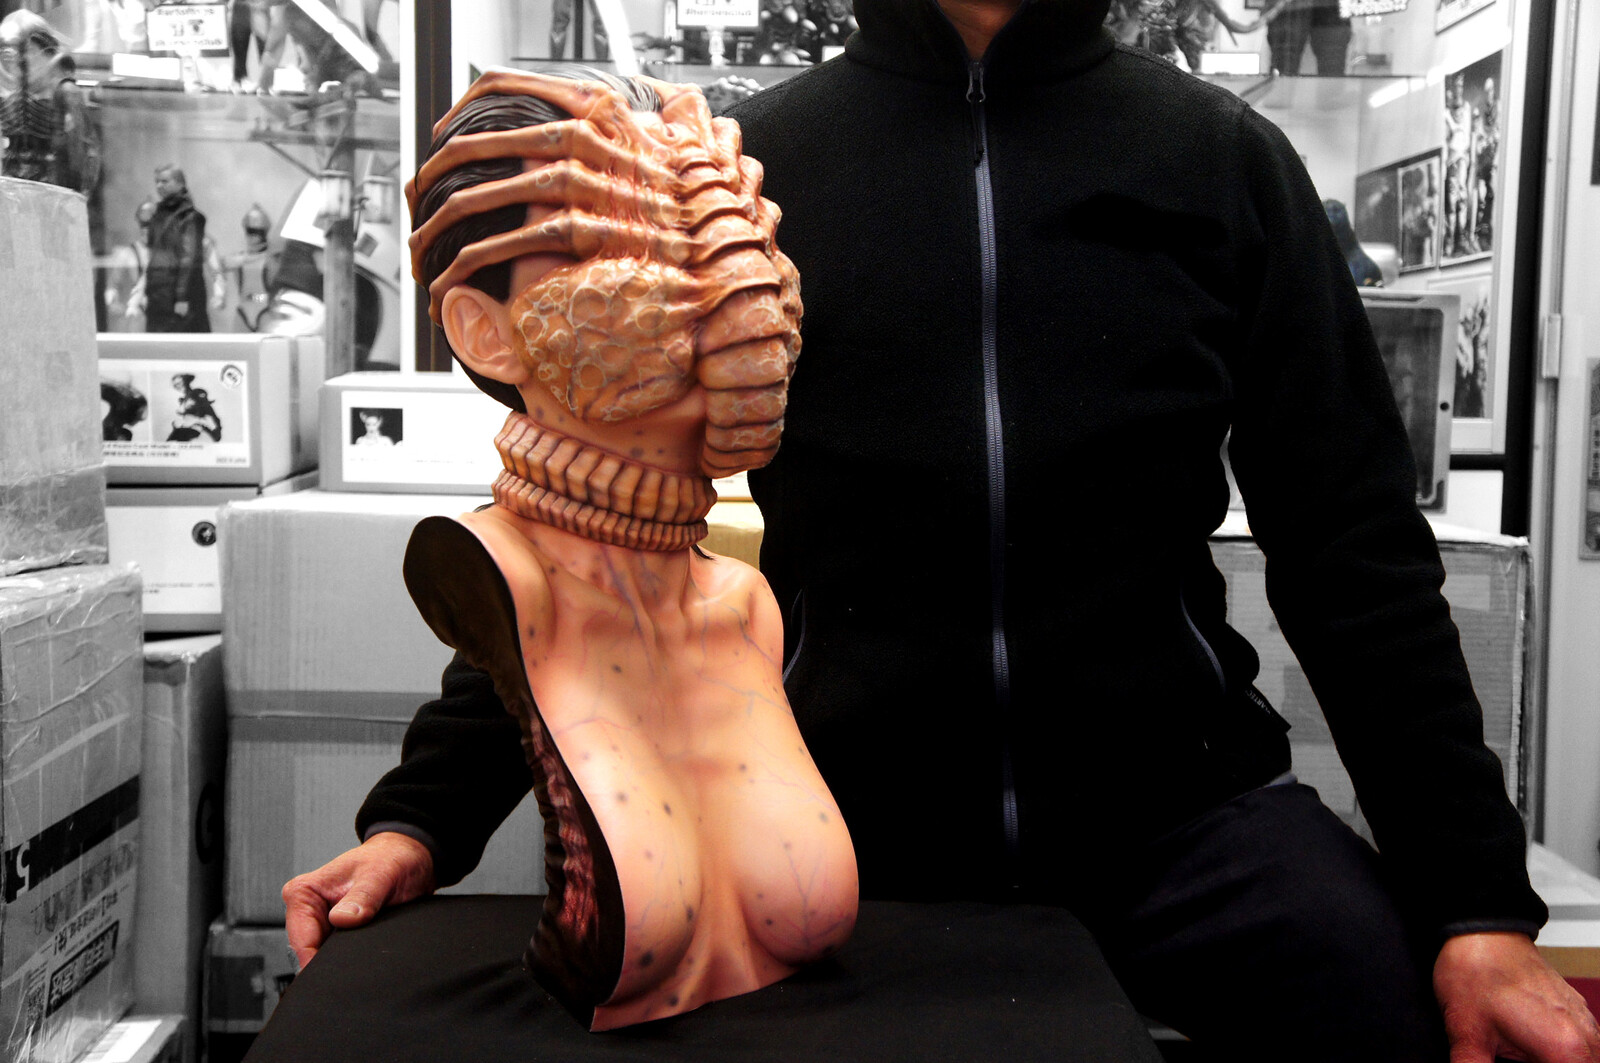 Alien Facehugger The Colonist 1:1 scale Bust Art Statue